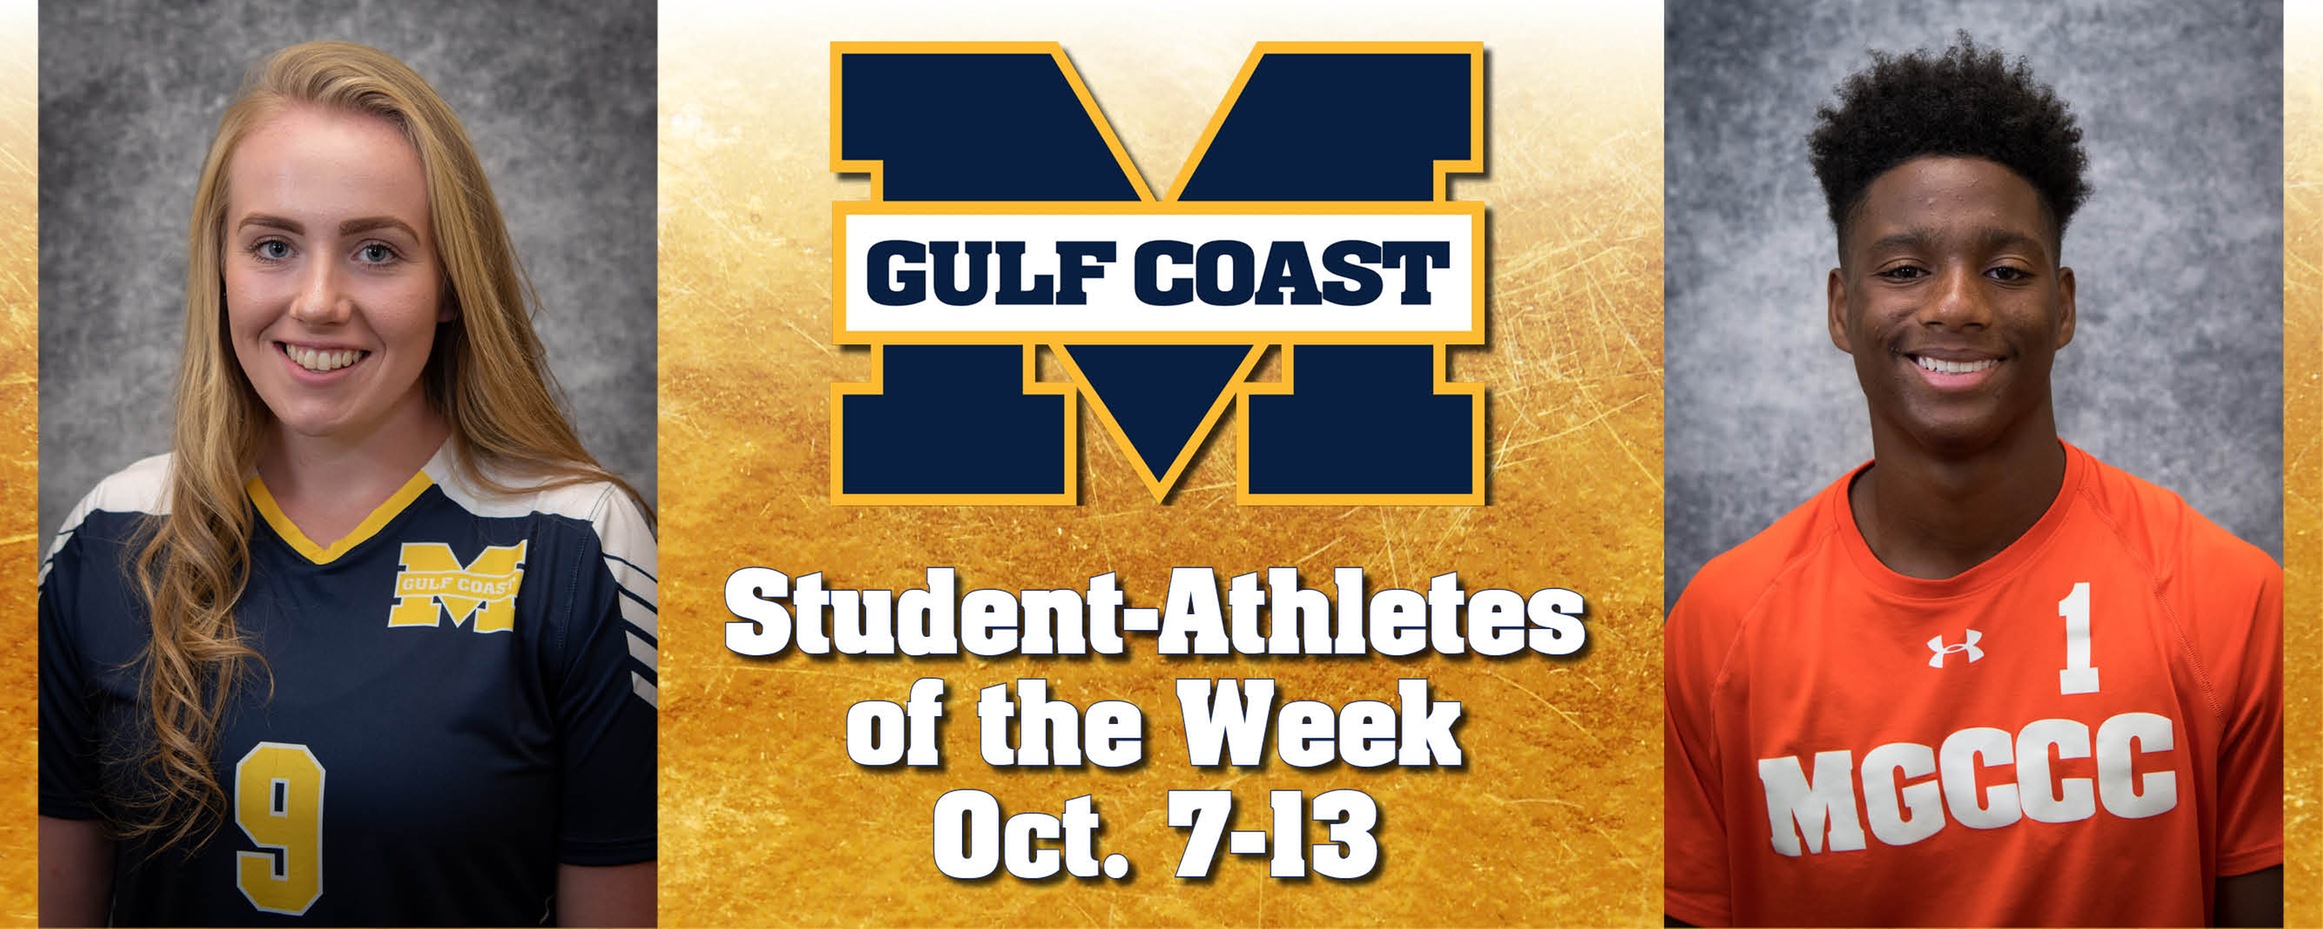 Fell, Gore named MGCCC Student-Athletes of the Week